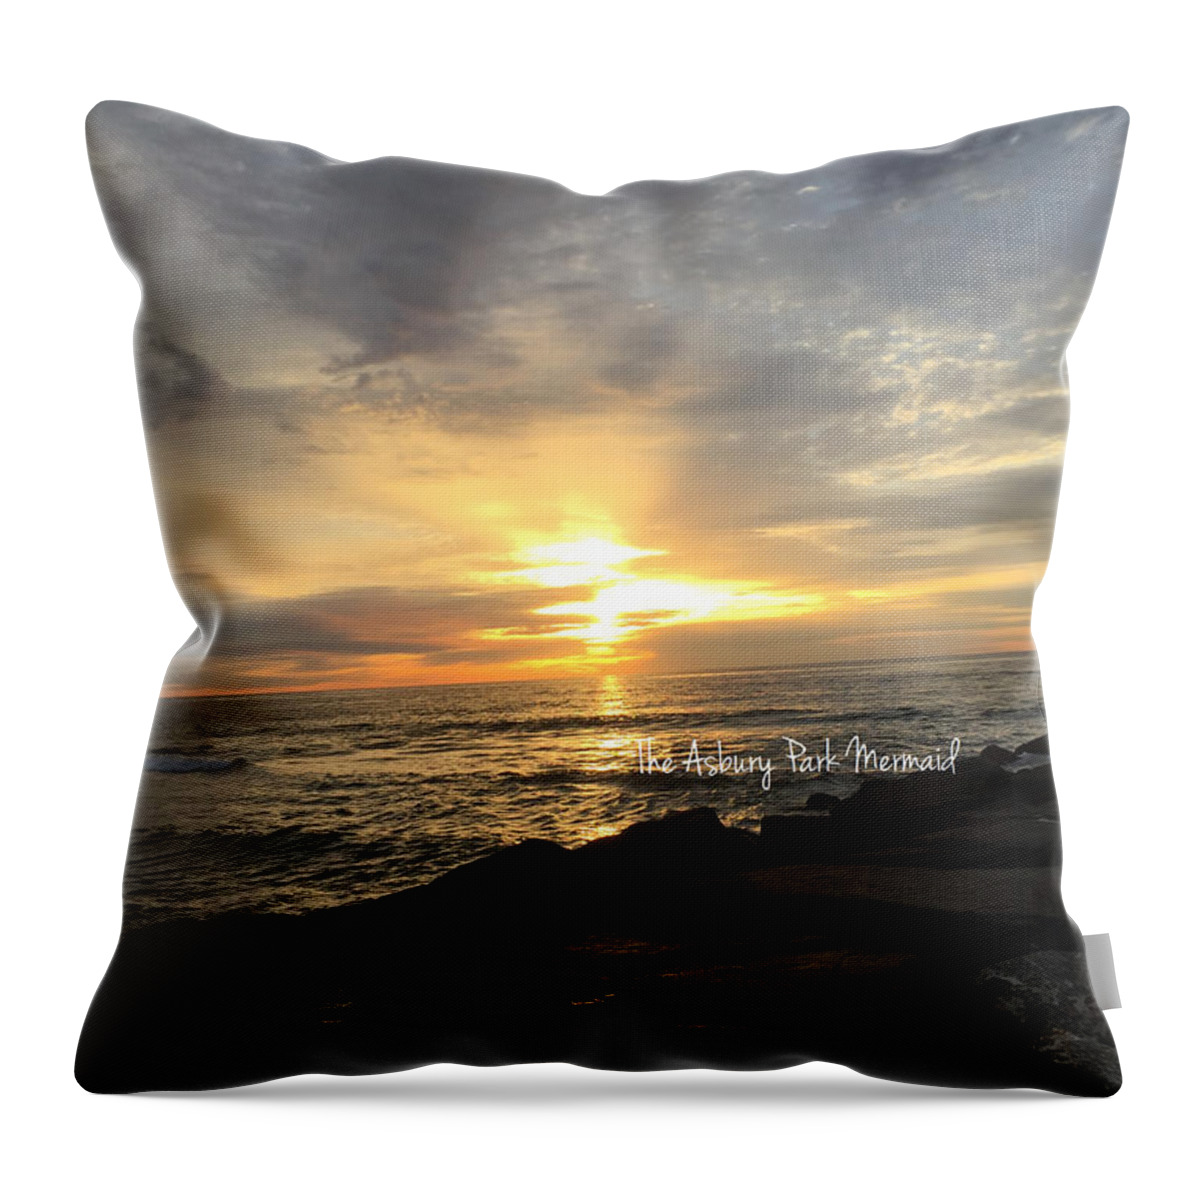 Asbury Park Throw Pillow featuring the painting Sunrise Over The Asbury Park Waterfront by The Asbury Park Mermaid